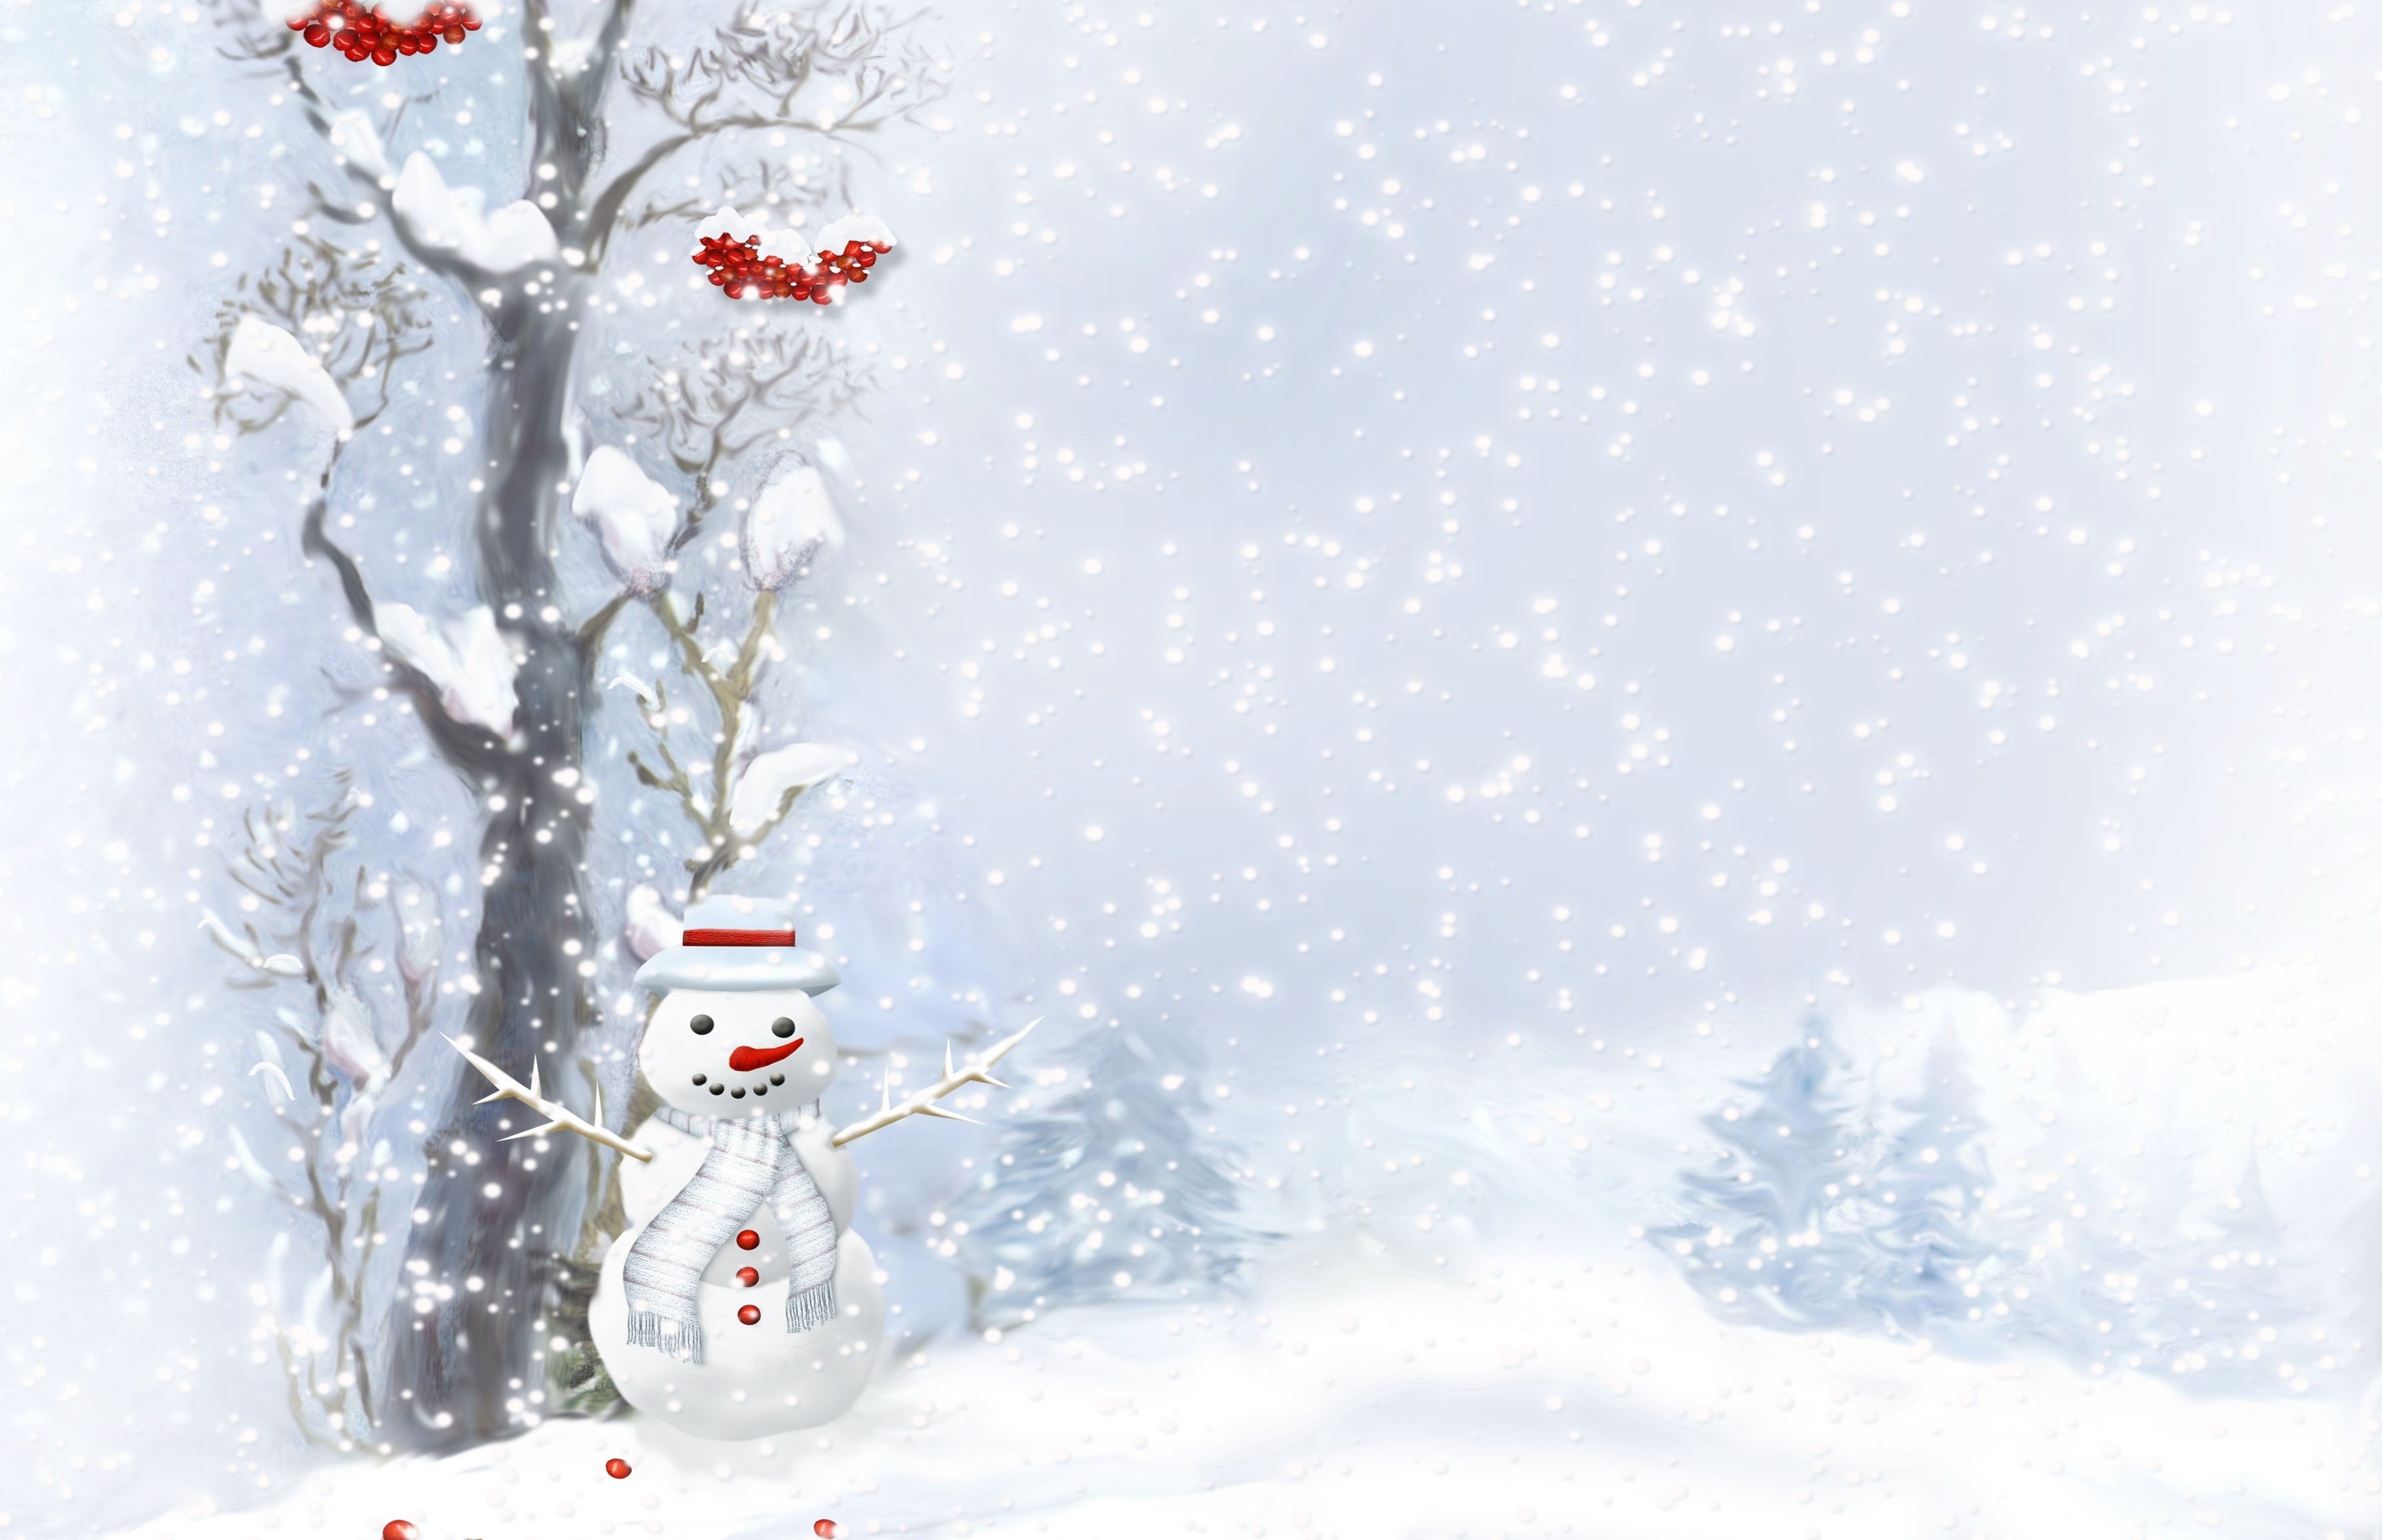 snowman, Scarf, Buttons, Wood, Berries, Trees, Snow Wallpaper